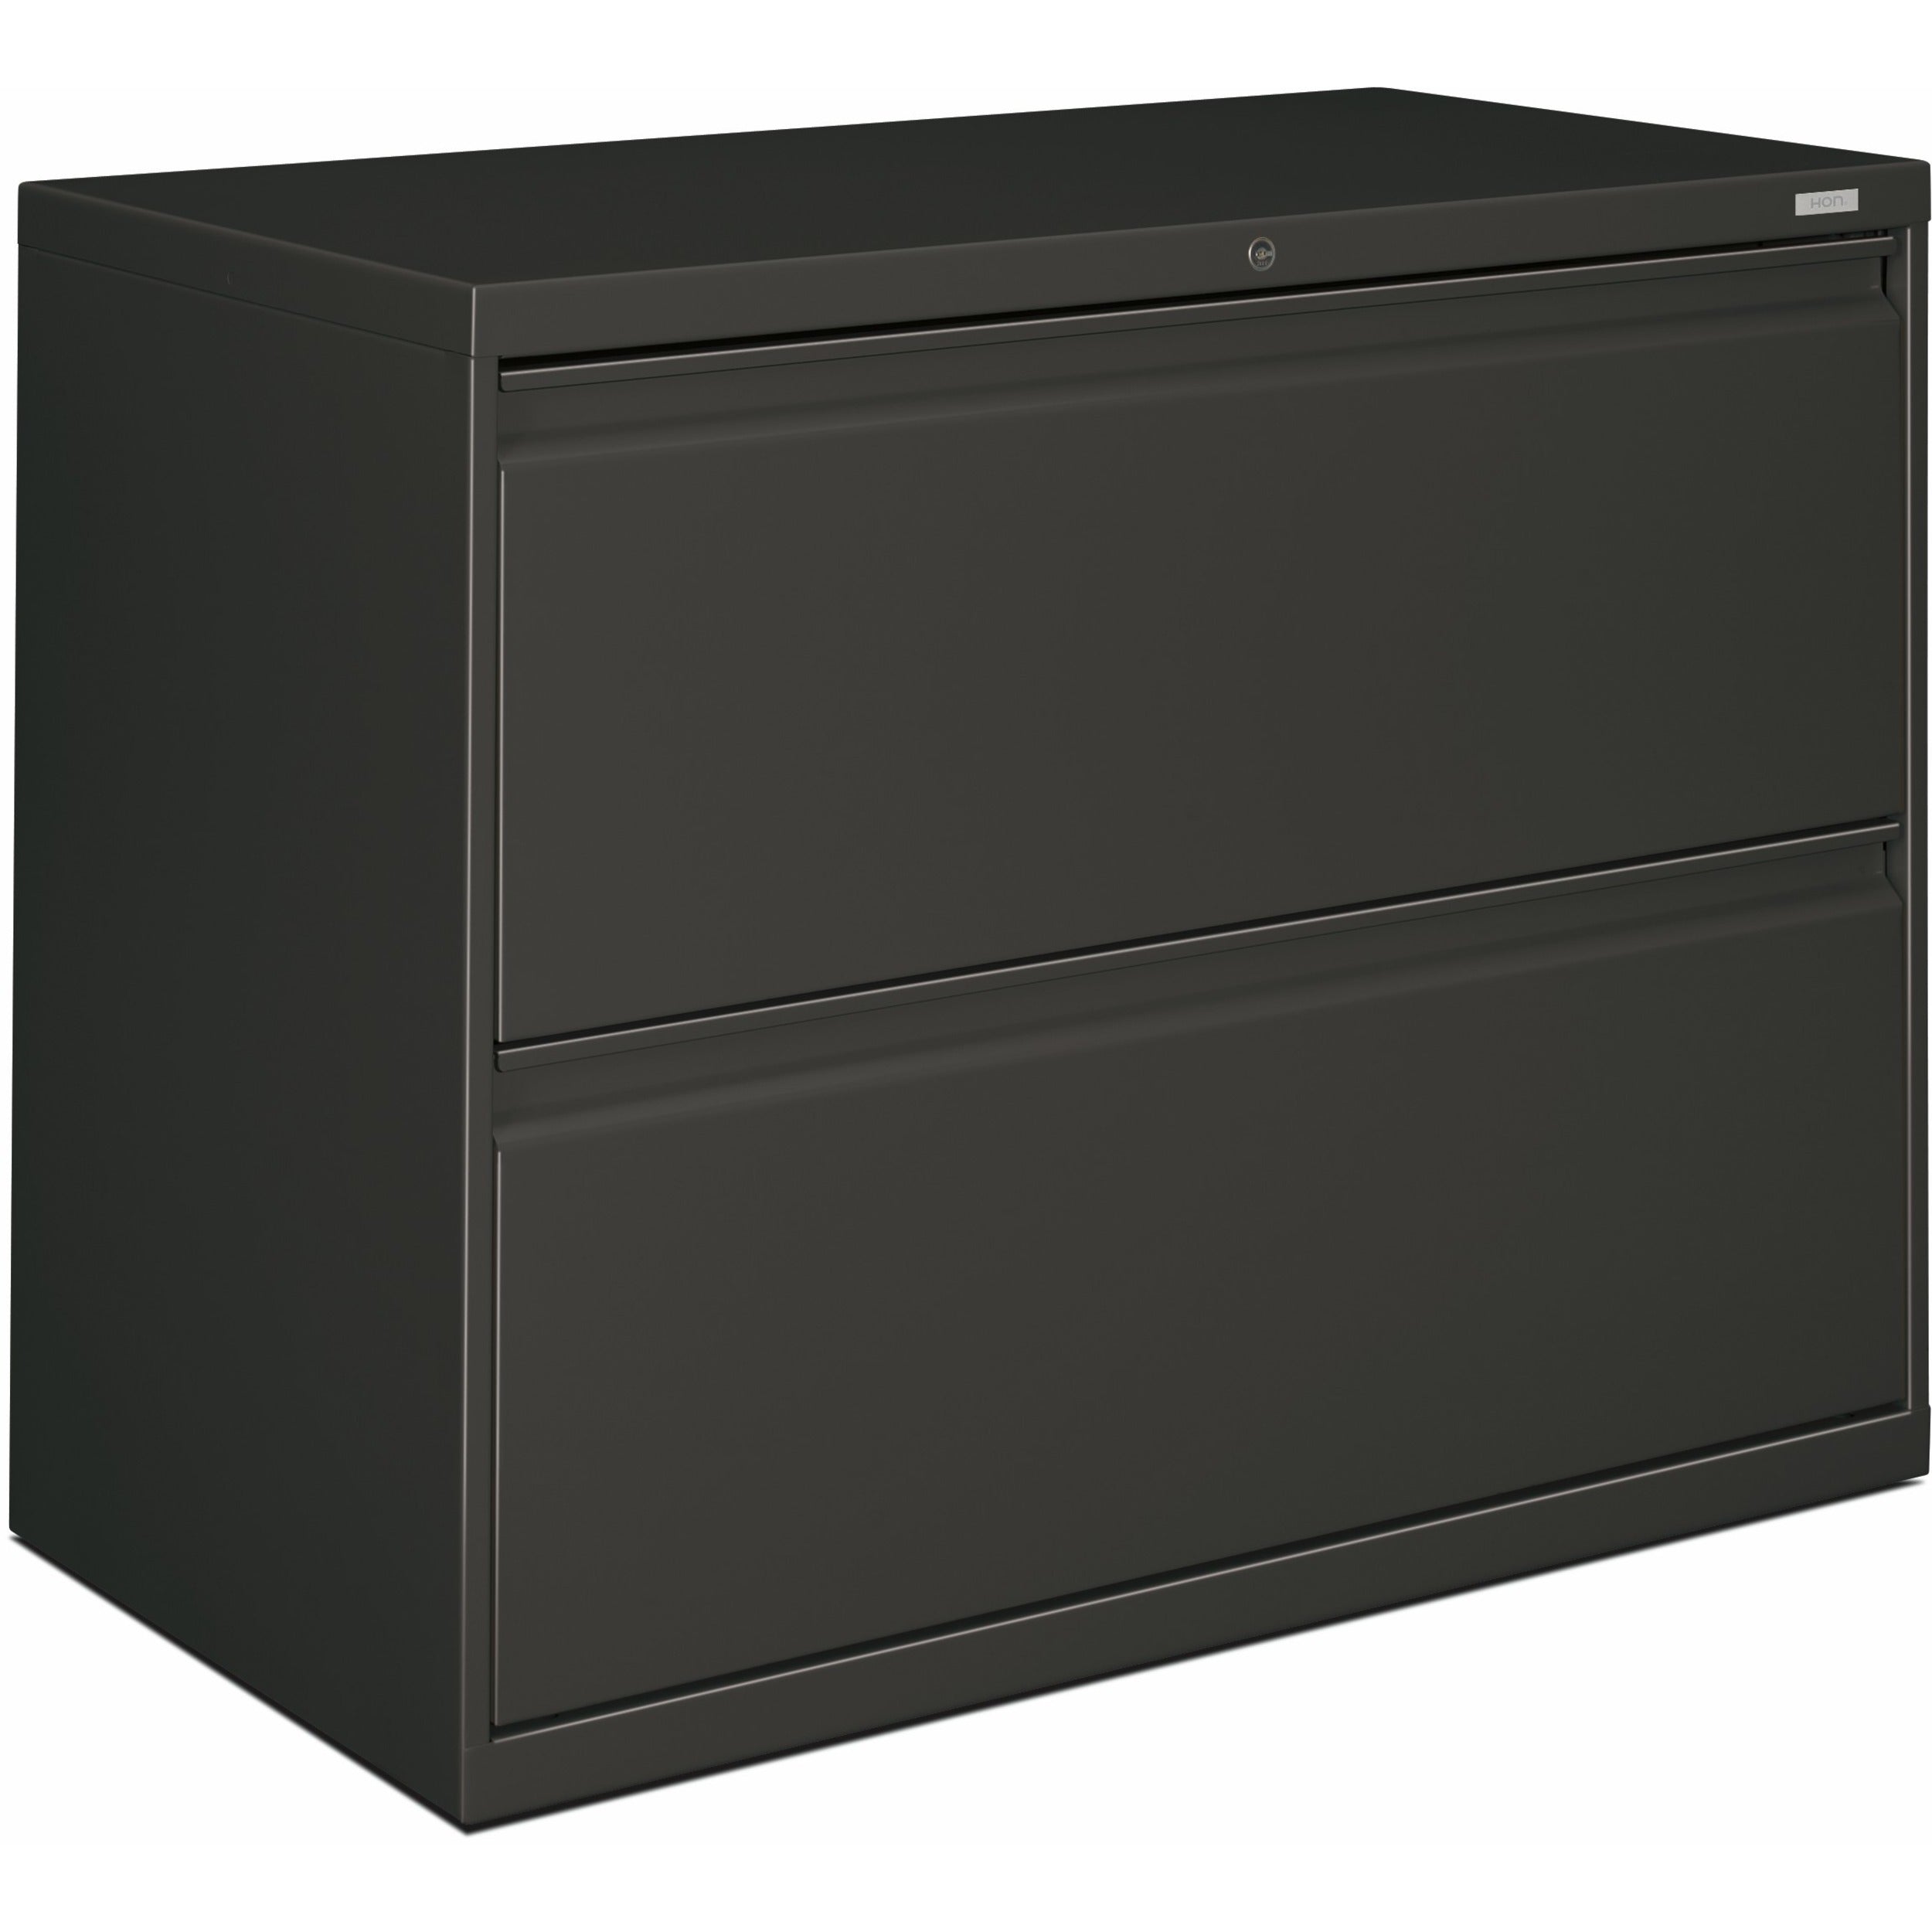 hon-brigade-800-h882-lateral-file-36-x-193284-2-drawers-finish-charcoal_hon882ls - 1